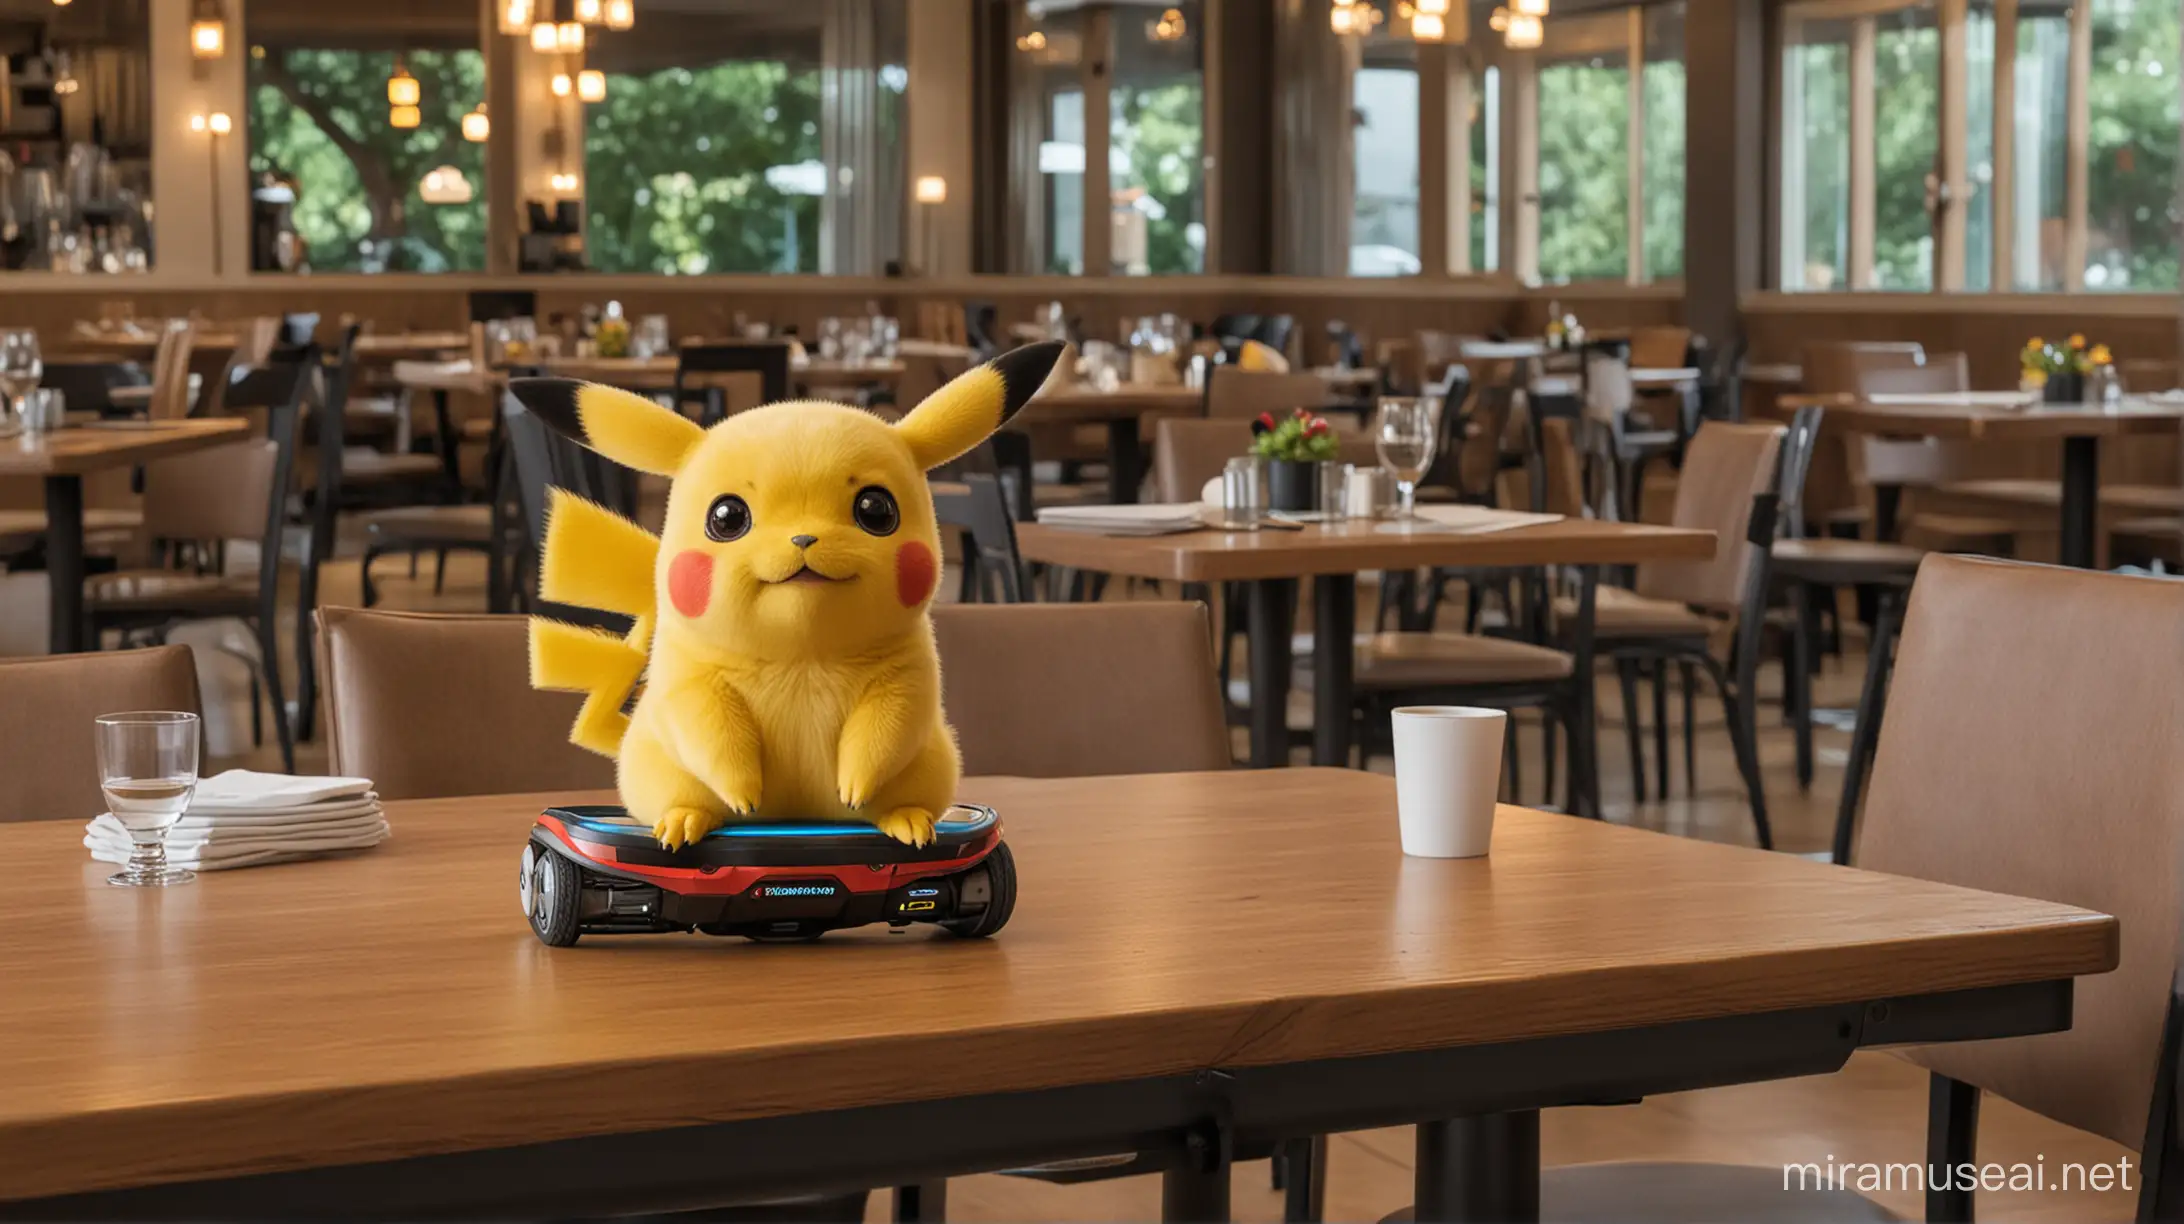 Pikachu sitting with her hoverboard at the restaurant table